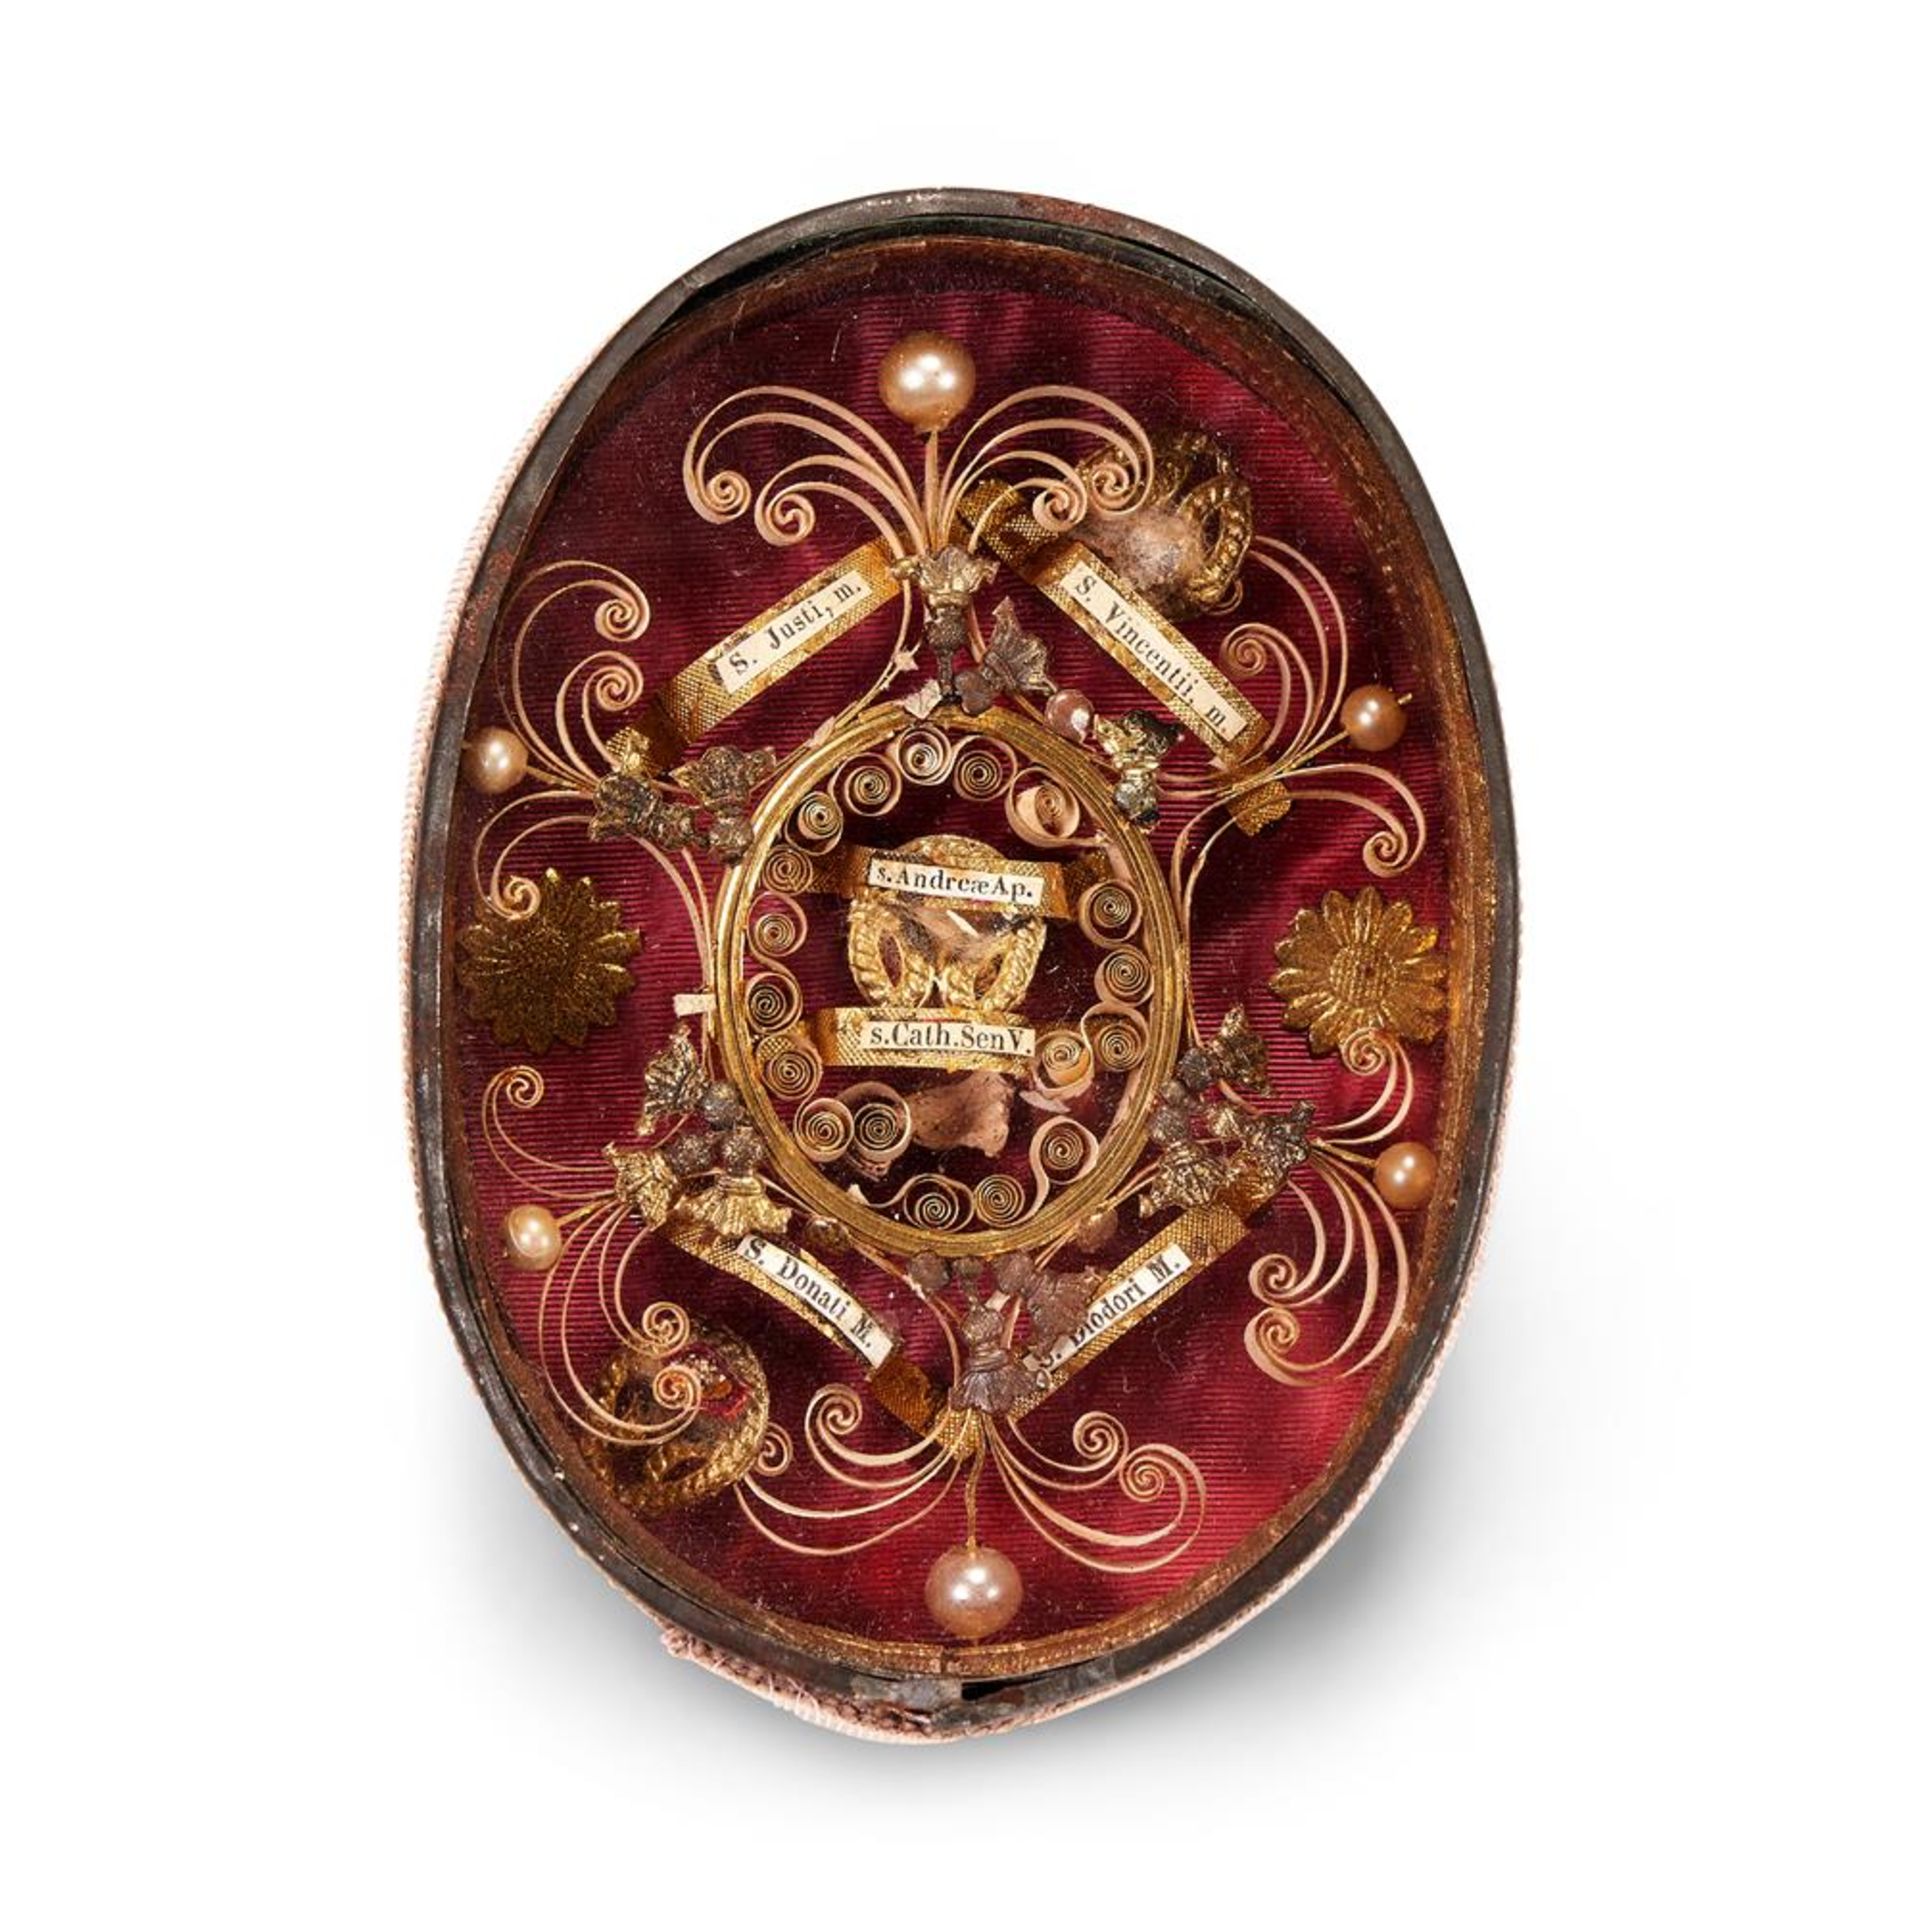 A SMALL ITALIAN OVAL RELIQUARY BOX, LATE 18TH/EARLY 19TH CENTURY - Image 2 of 2